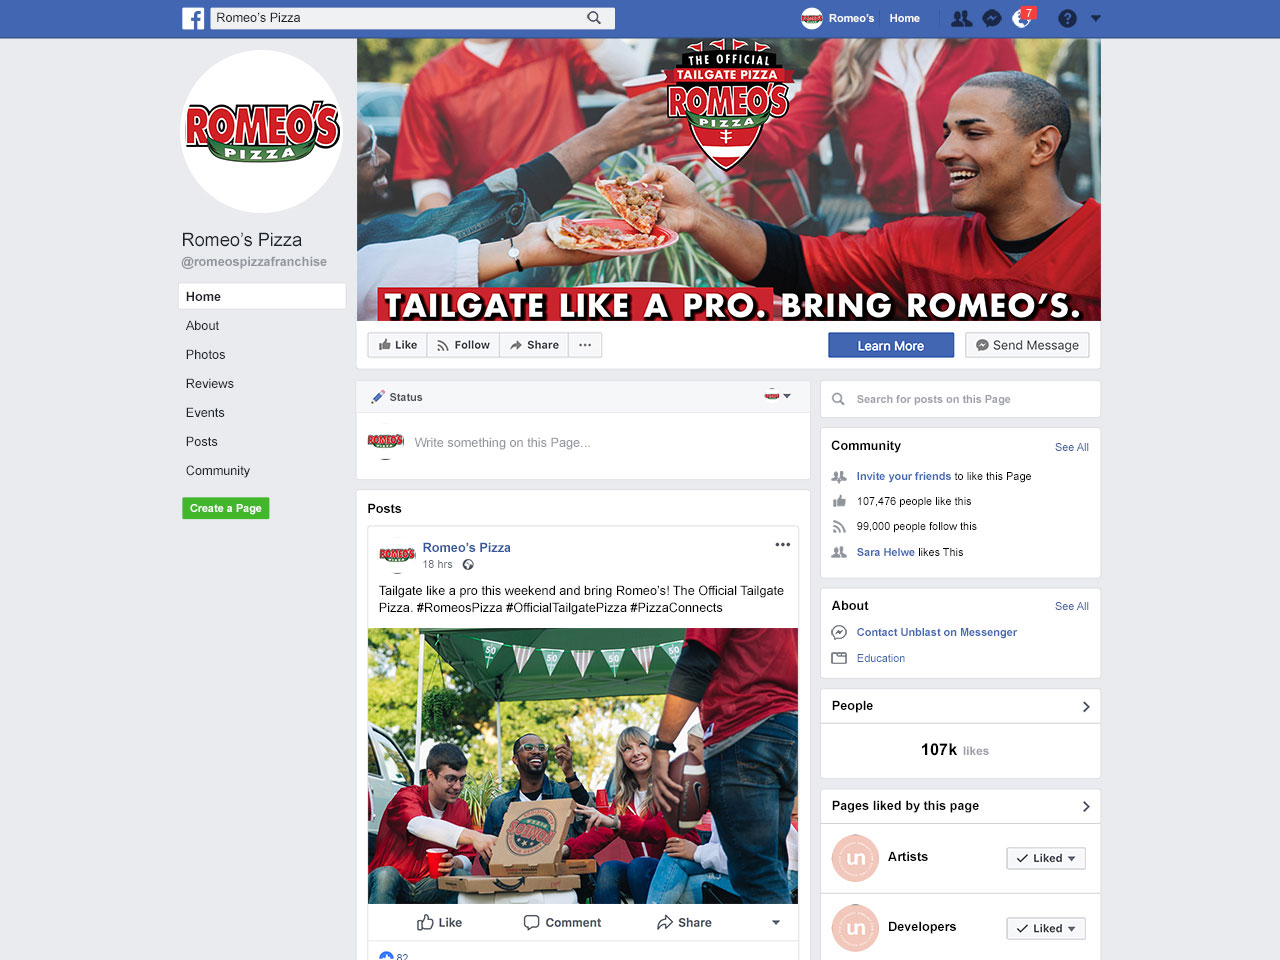 Romeo's Pizza Facebook page layout